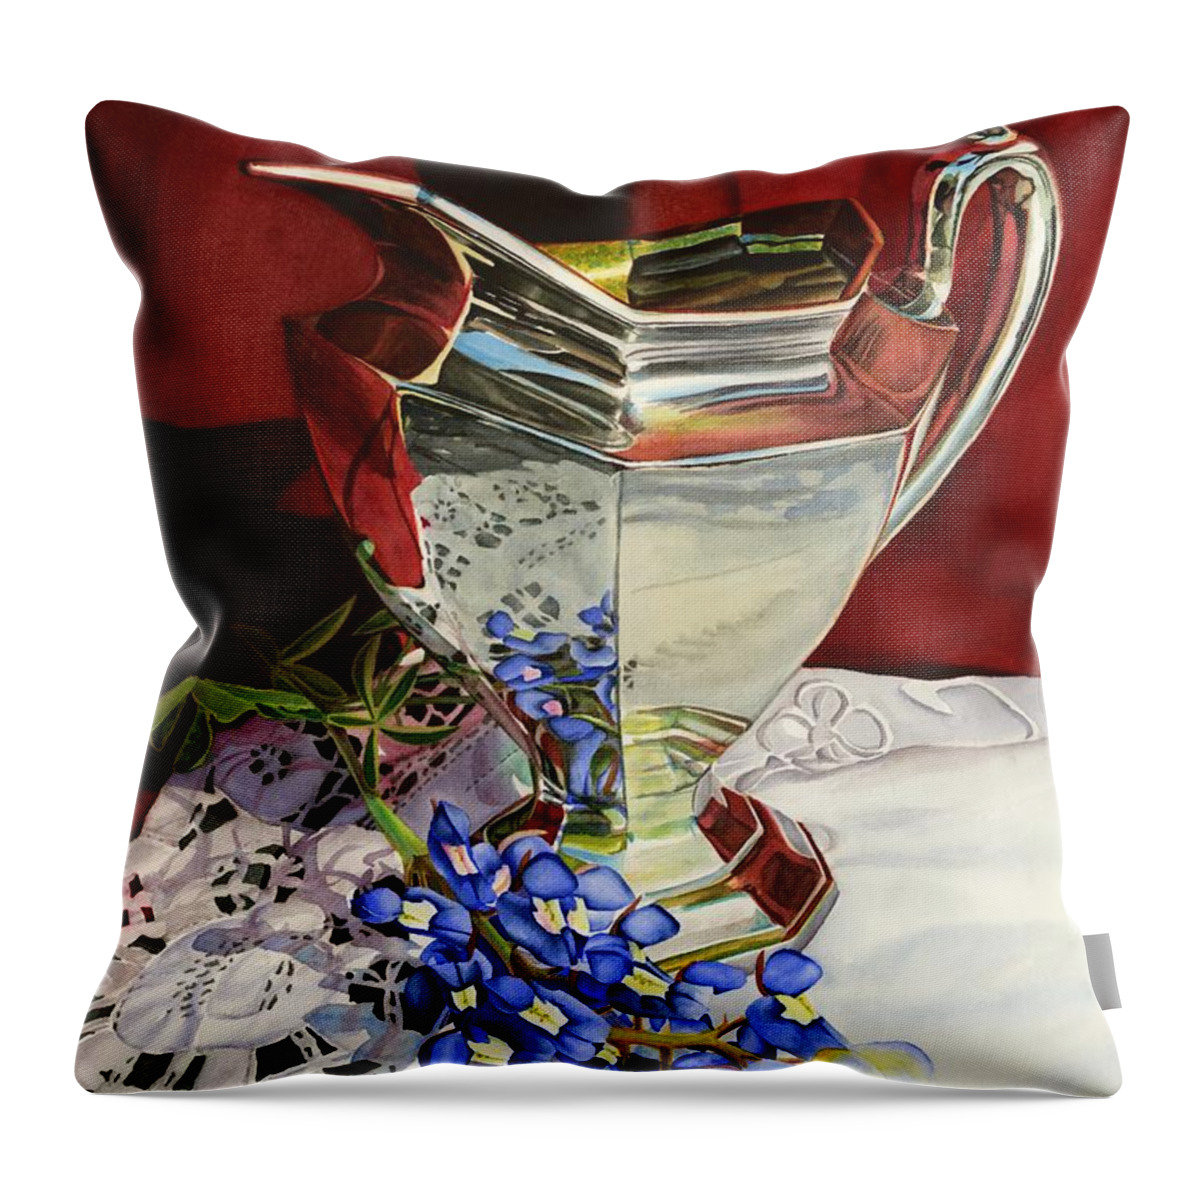 Silver Pitcher Throw Pillow featuring the painting Silver Pitcher and Bluebonnet by Hailey E Herrera